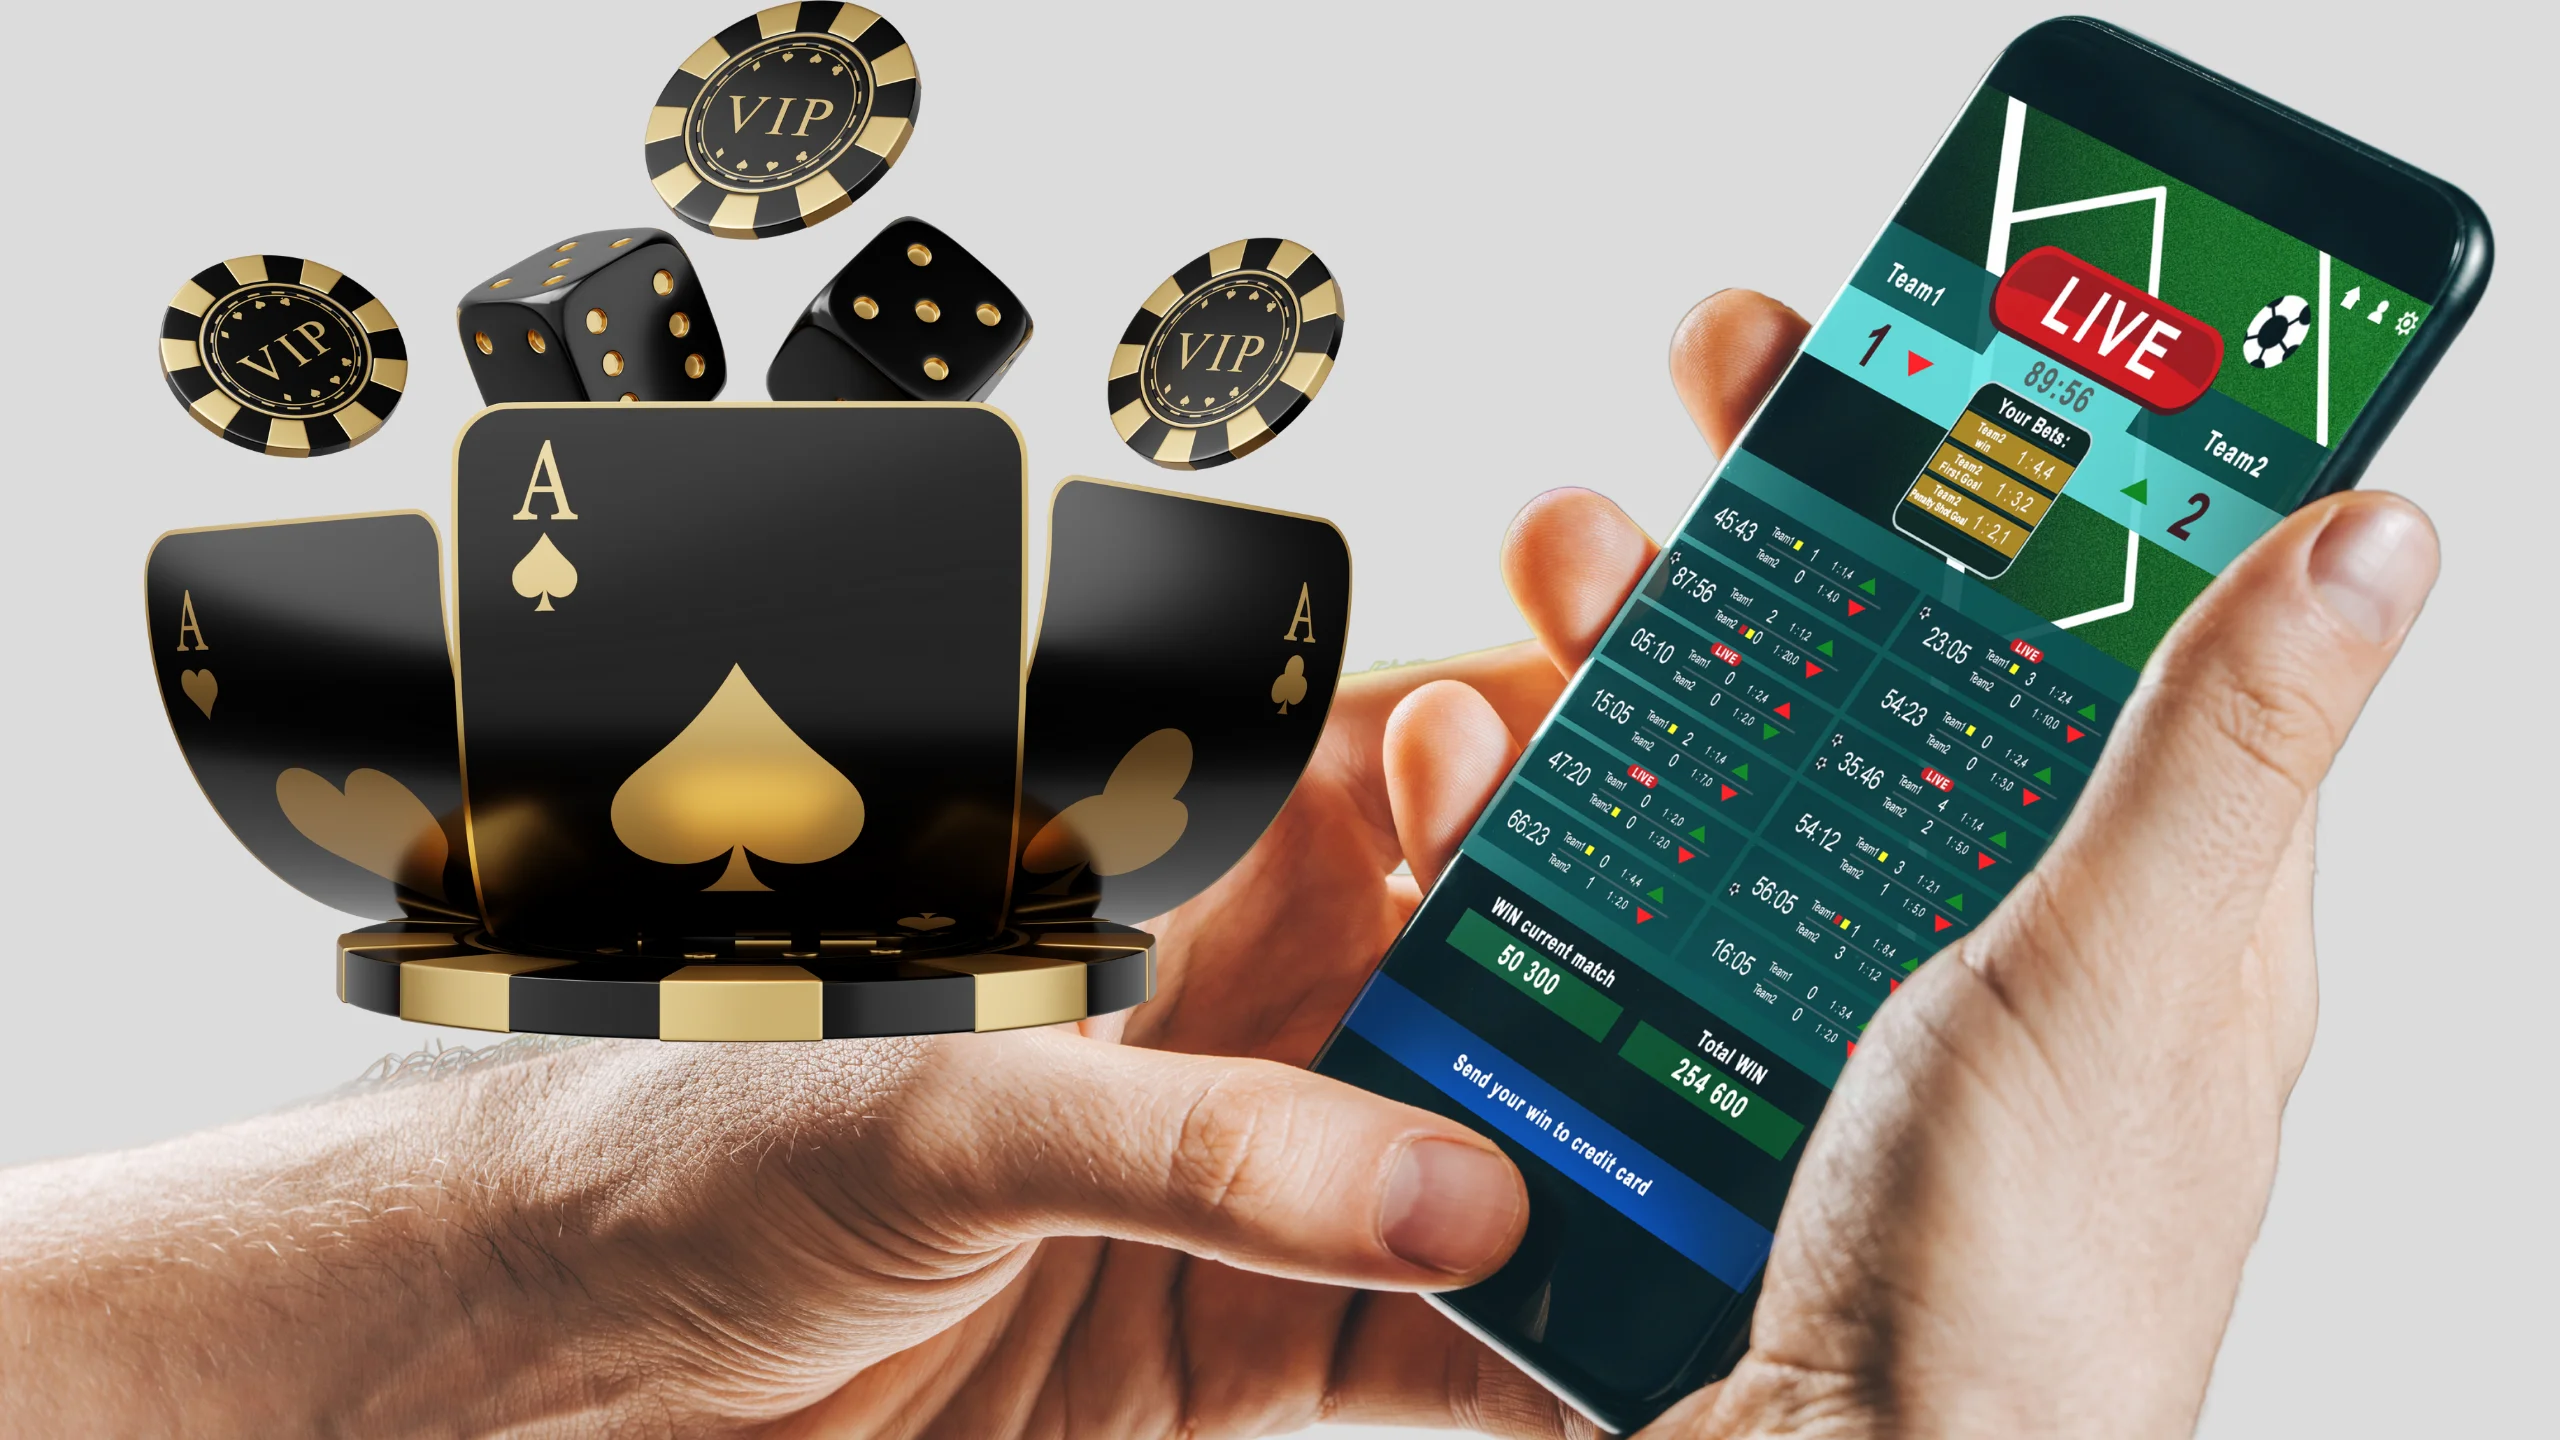 Experience the thrill of skill-based betting with our innovative features. Put your expertise to the test and elevate your gaming strategy to win big rewards.